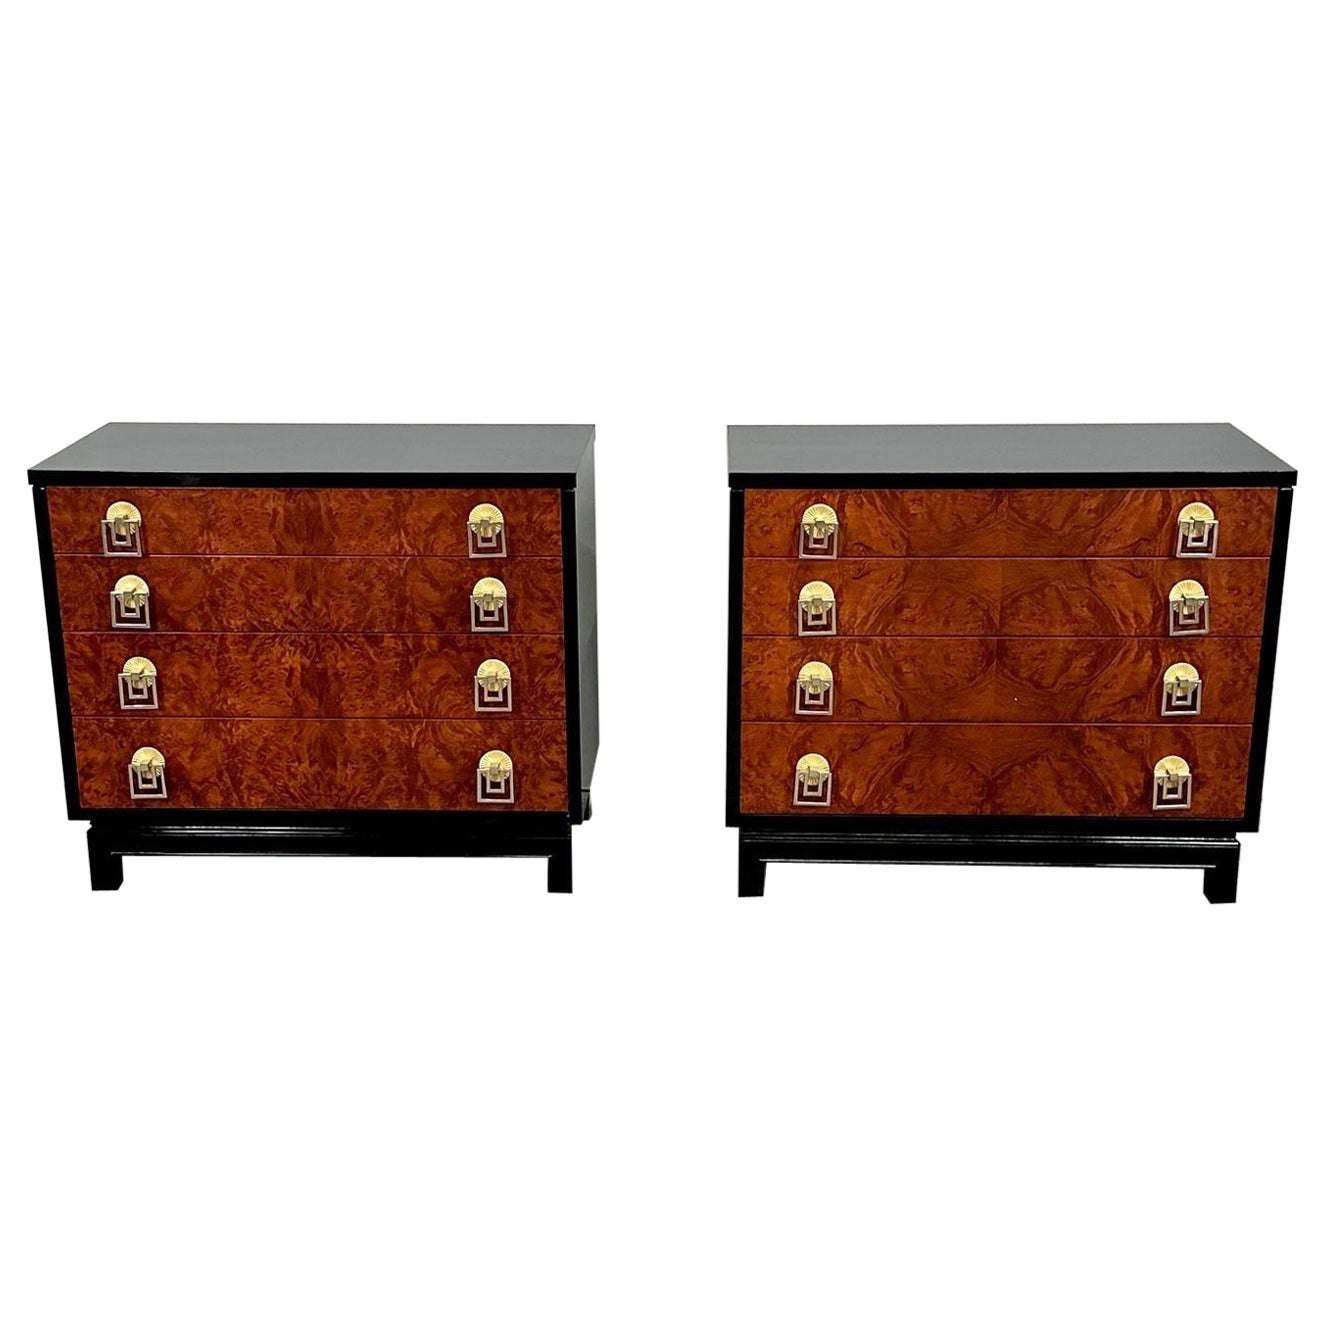 Italian Mid-Century Modern Renzo Retulli Style Chests / Commodes / Nightstands For Sale